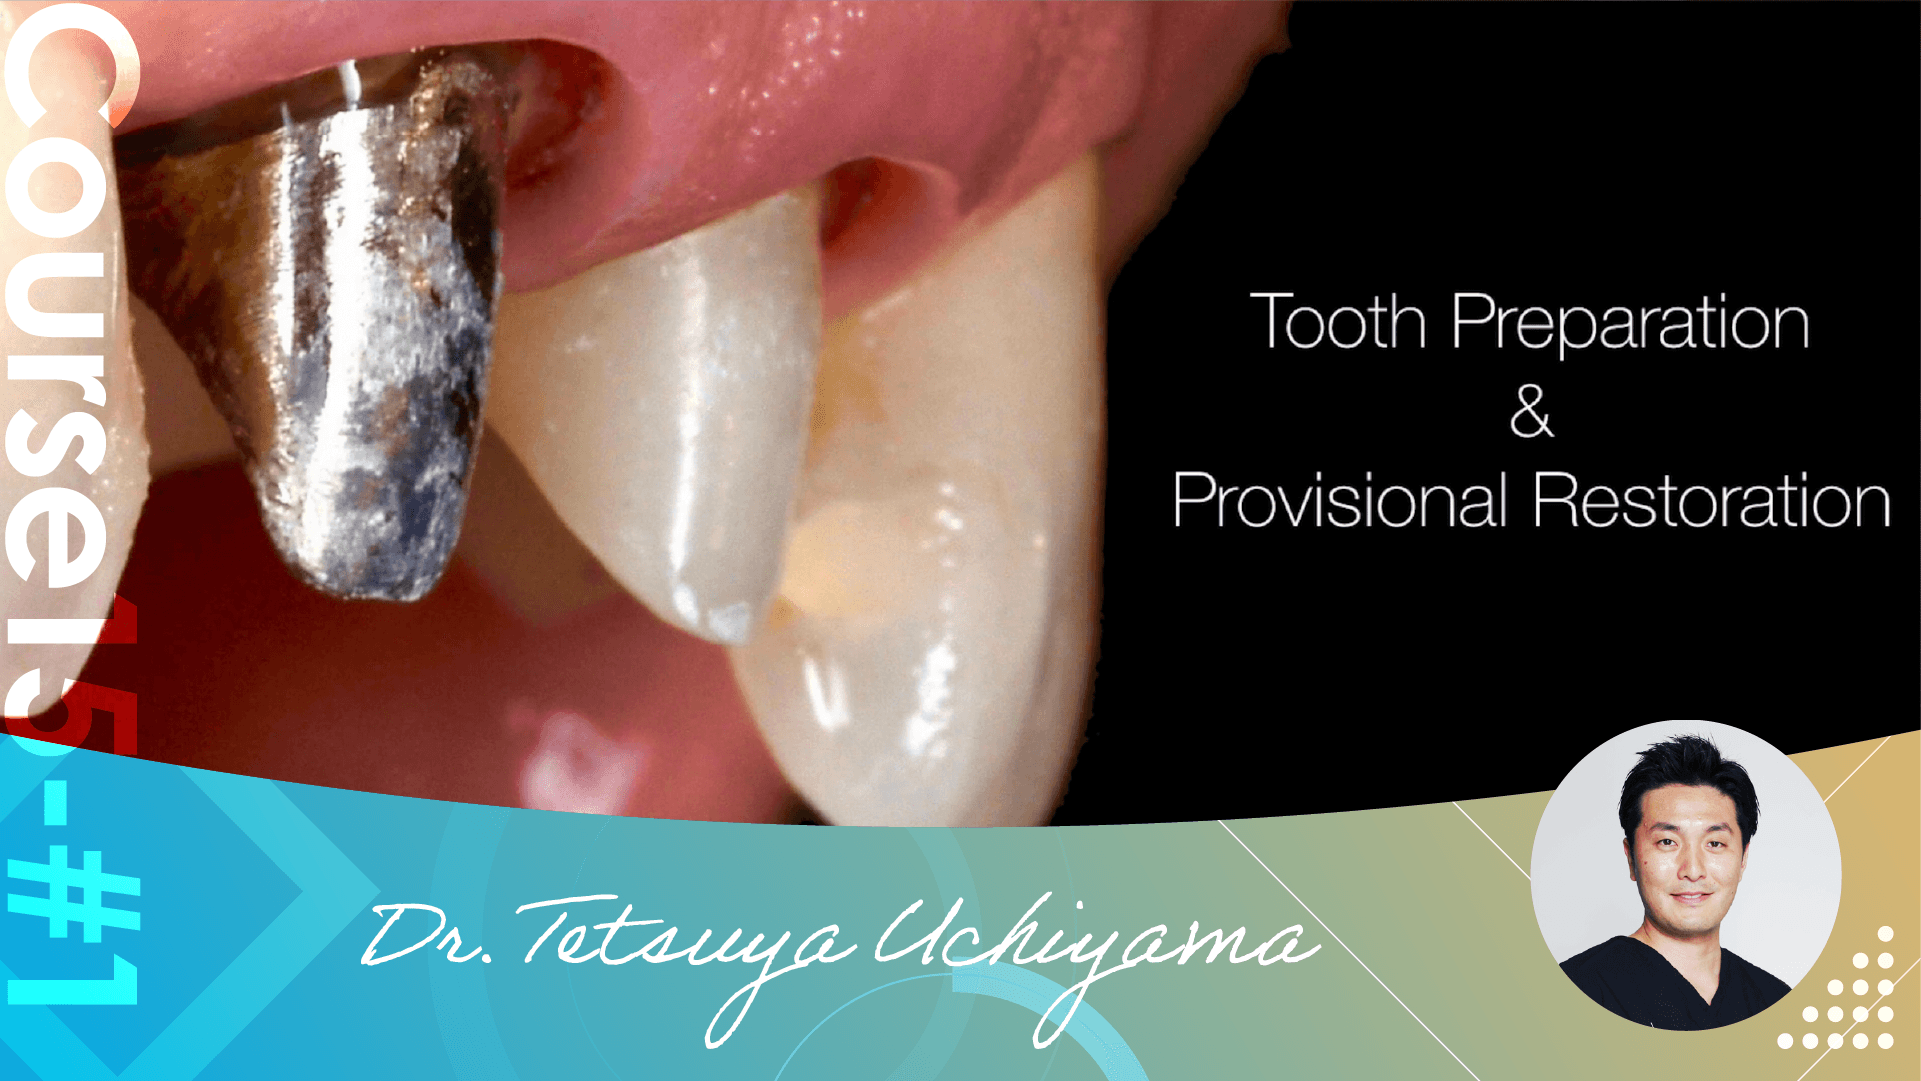 #1 Tooth Preparation Requirements